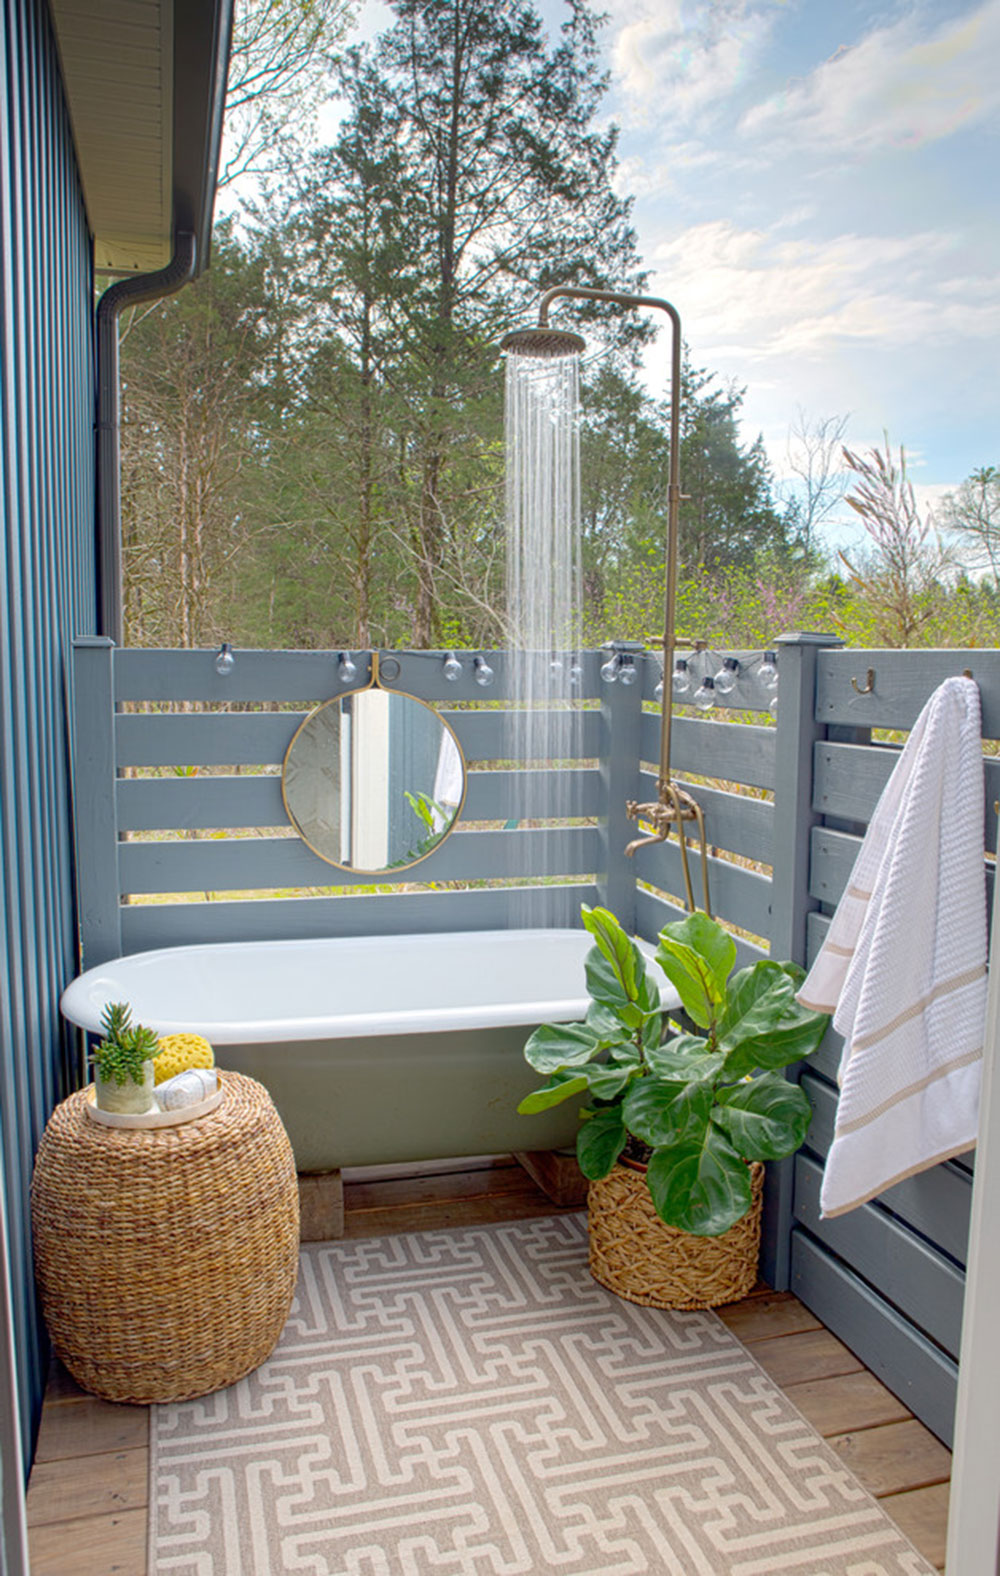 West-Coast-Style-Cottage-by-Sharon-Barrett-Interiors Outdoor shower ideas to create an outdoor experience